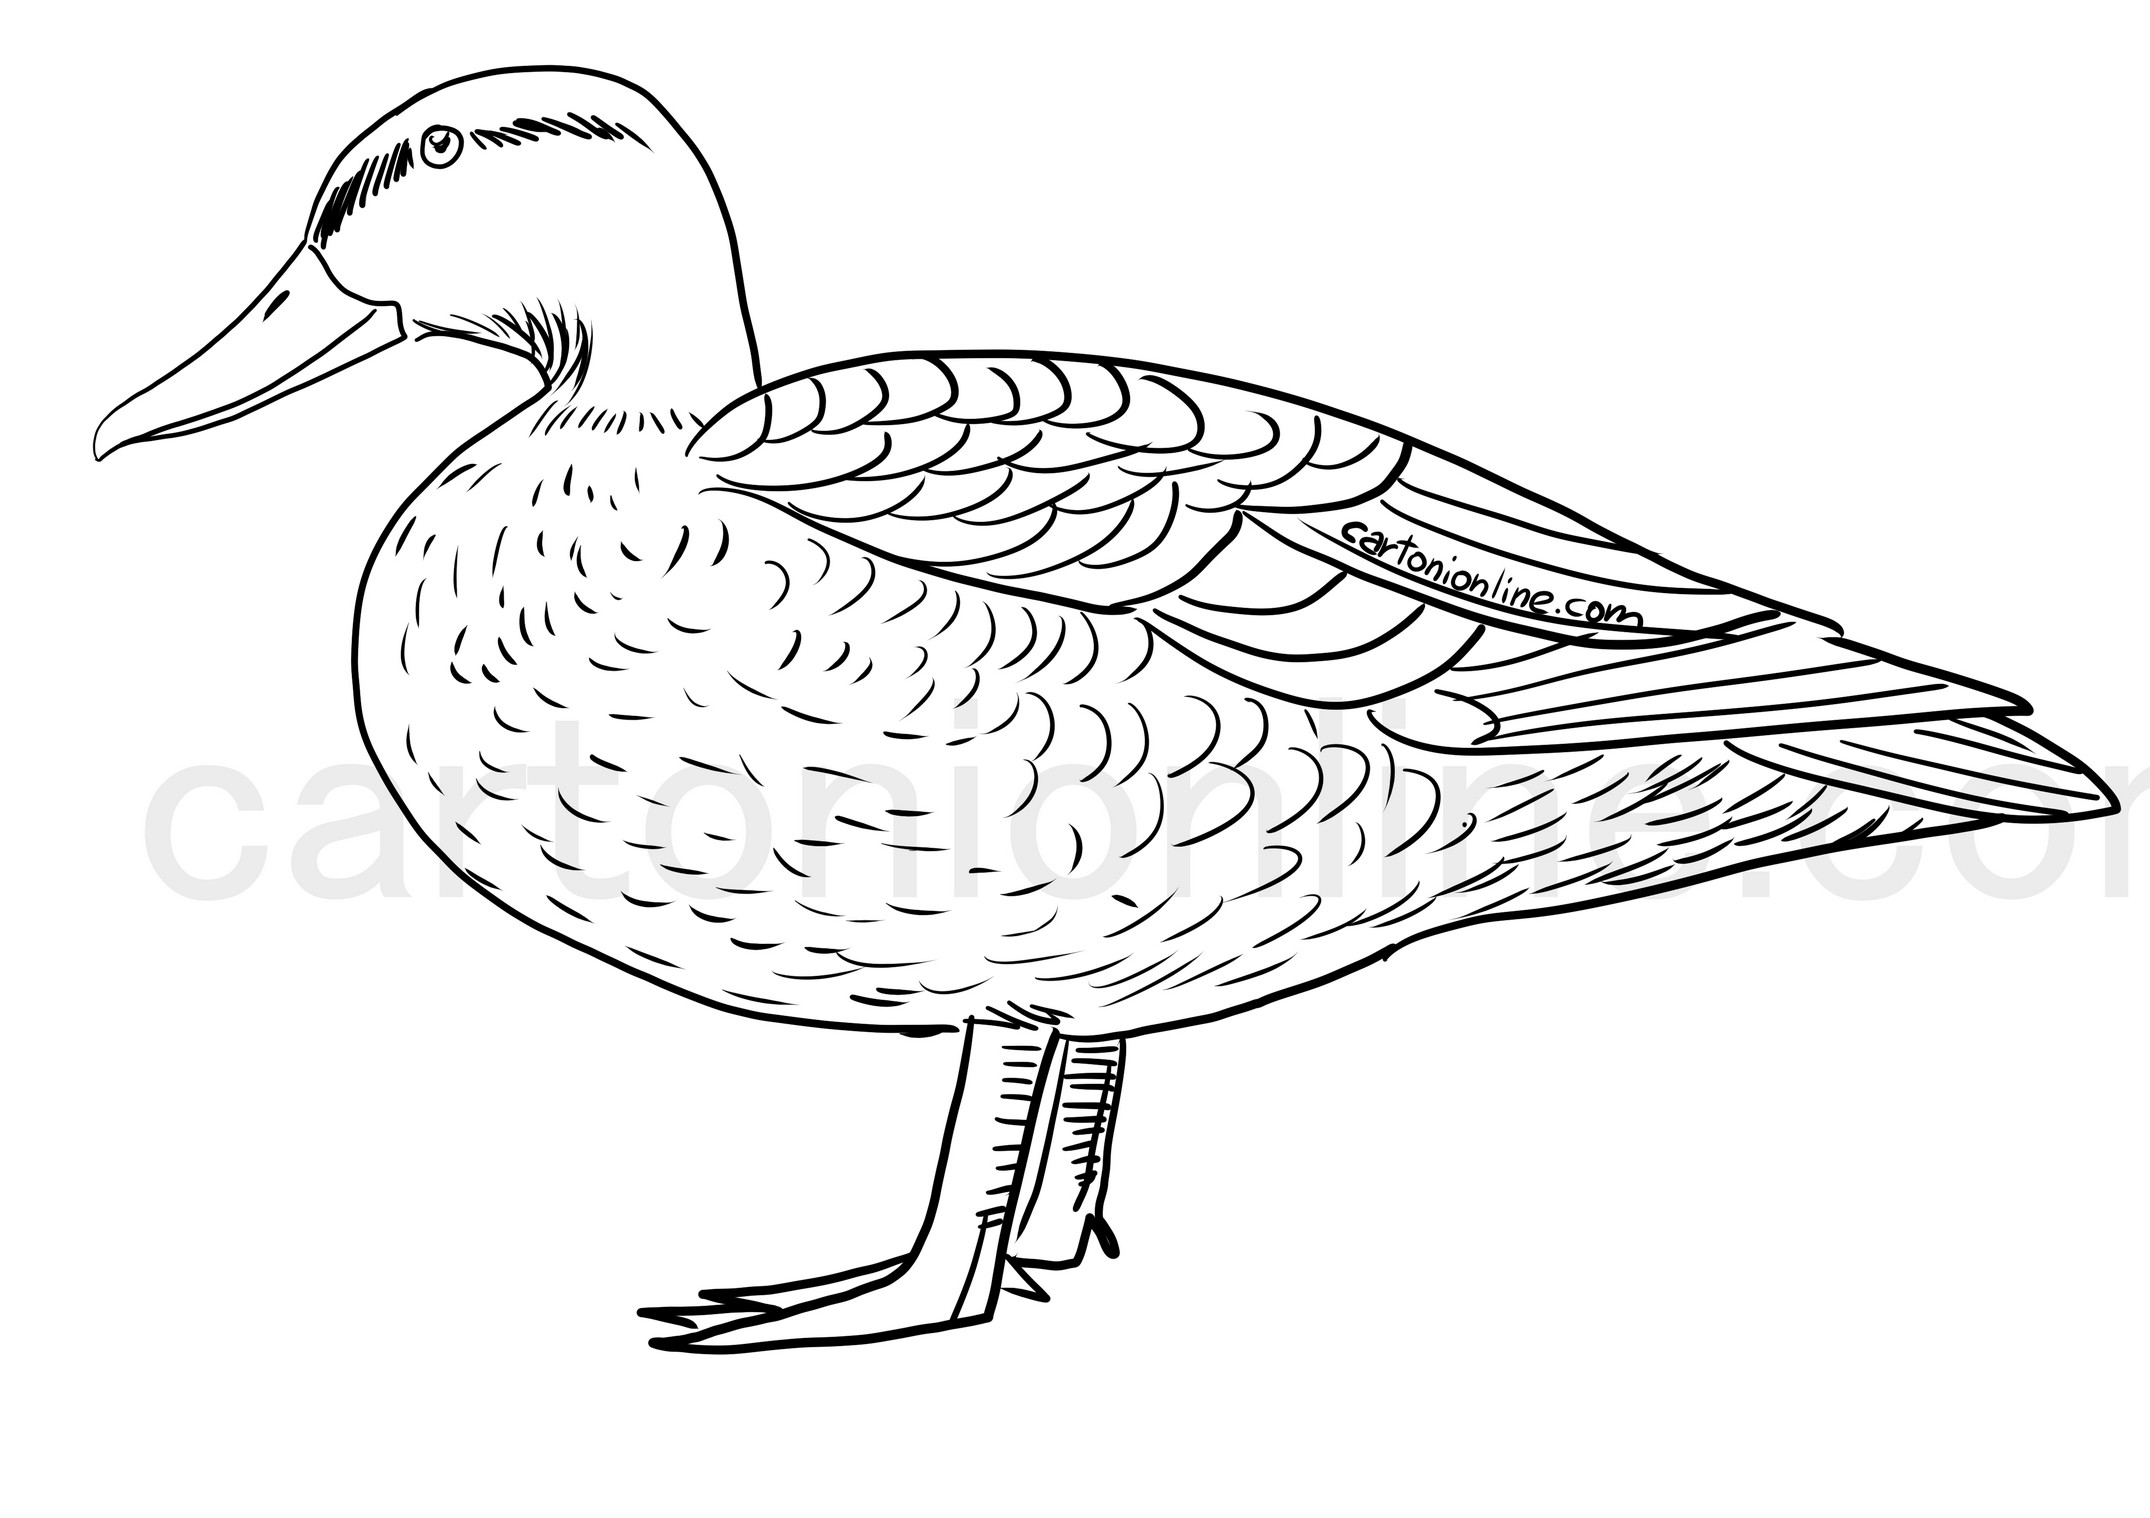 Realistic Duck coloring page to print and coloring